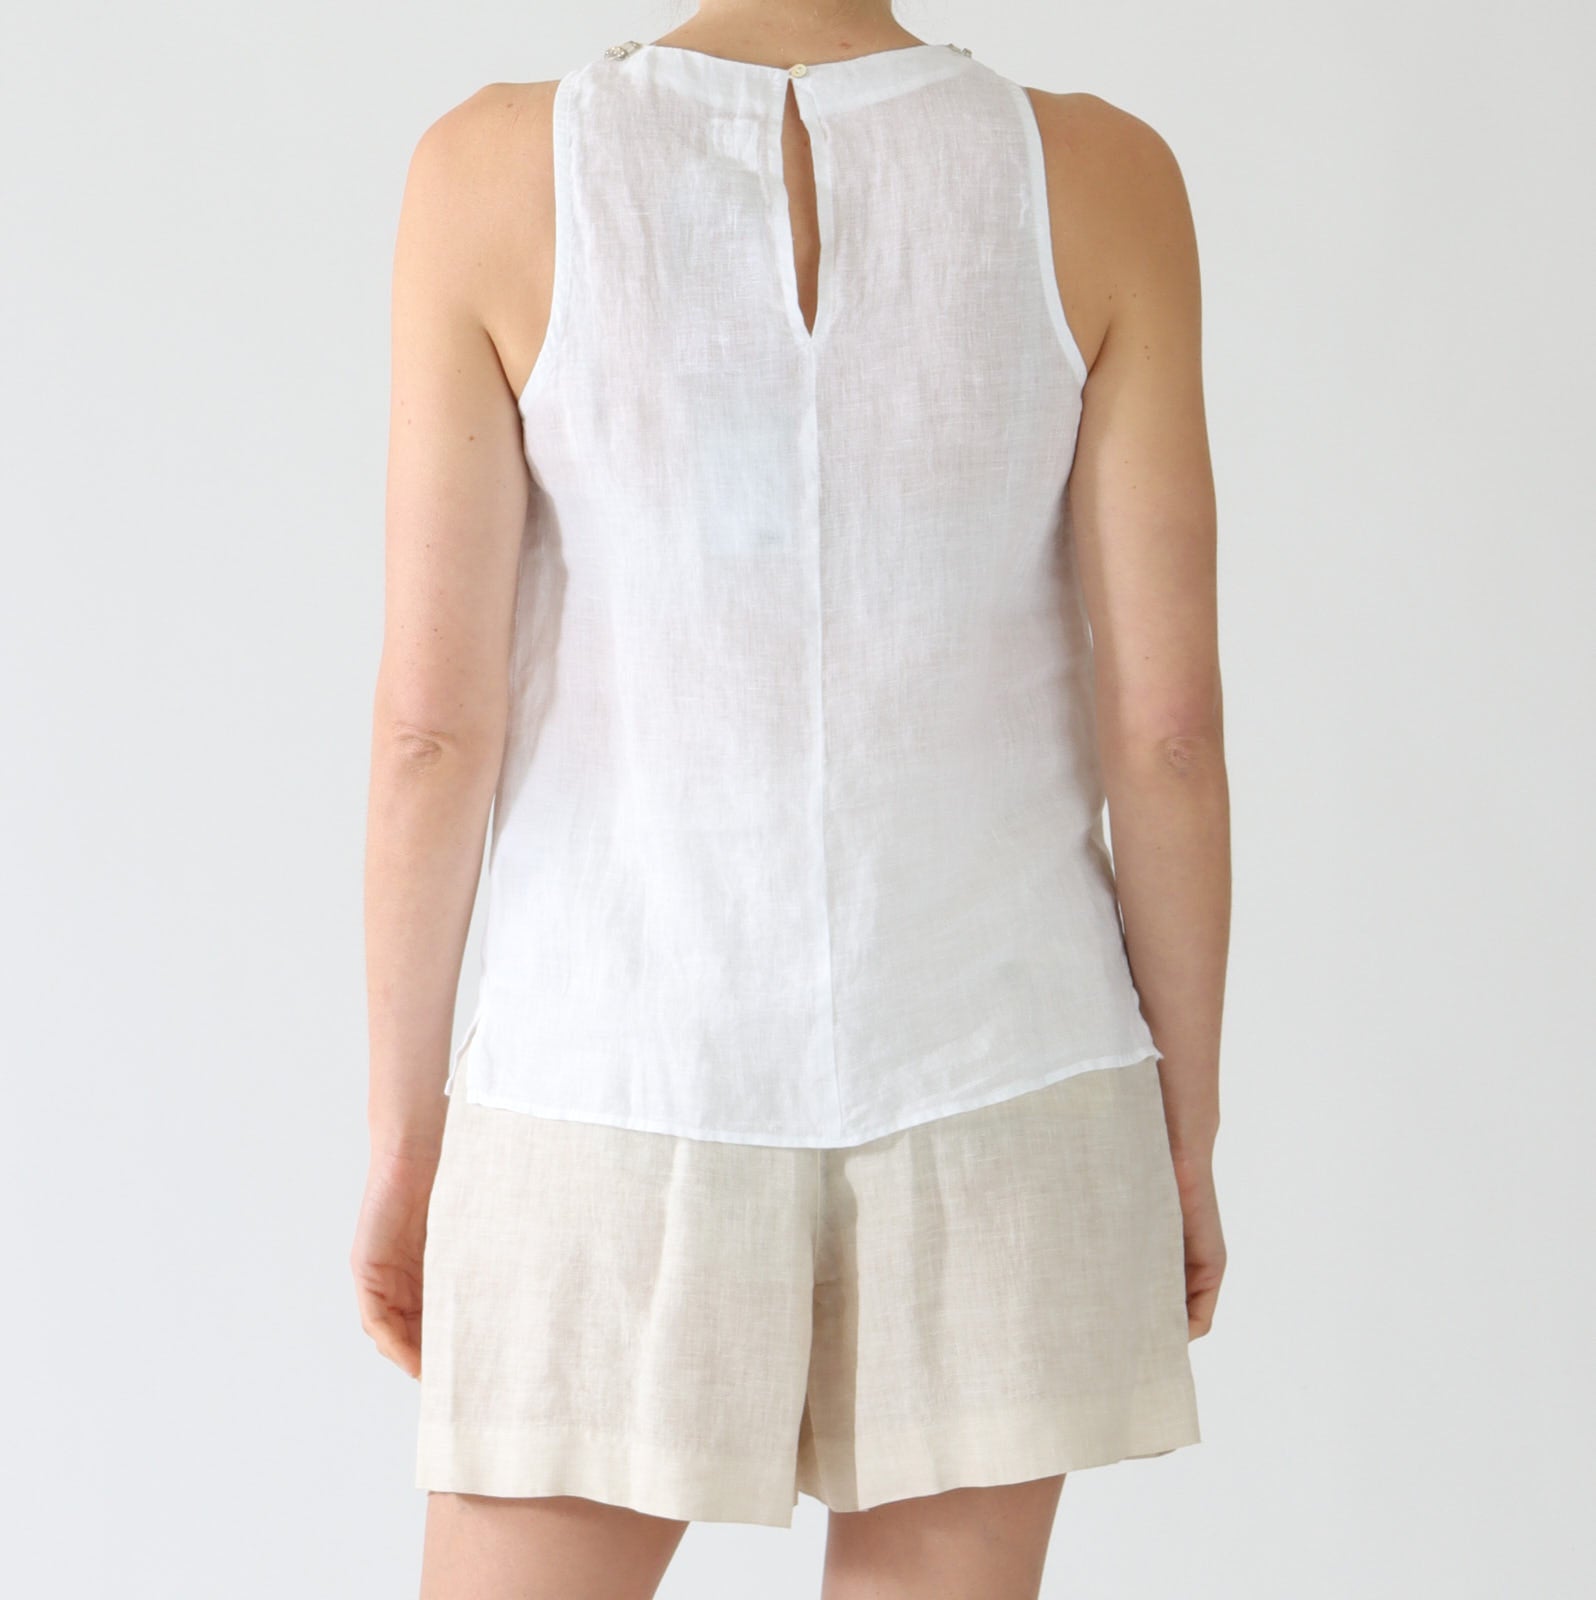 White Sleeveless Linen Top With Beaded Trim